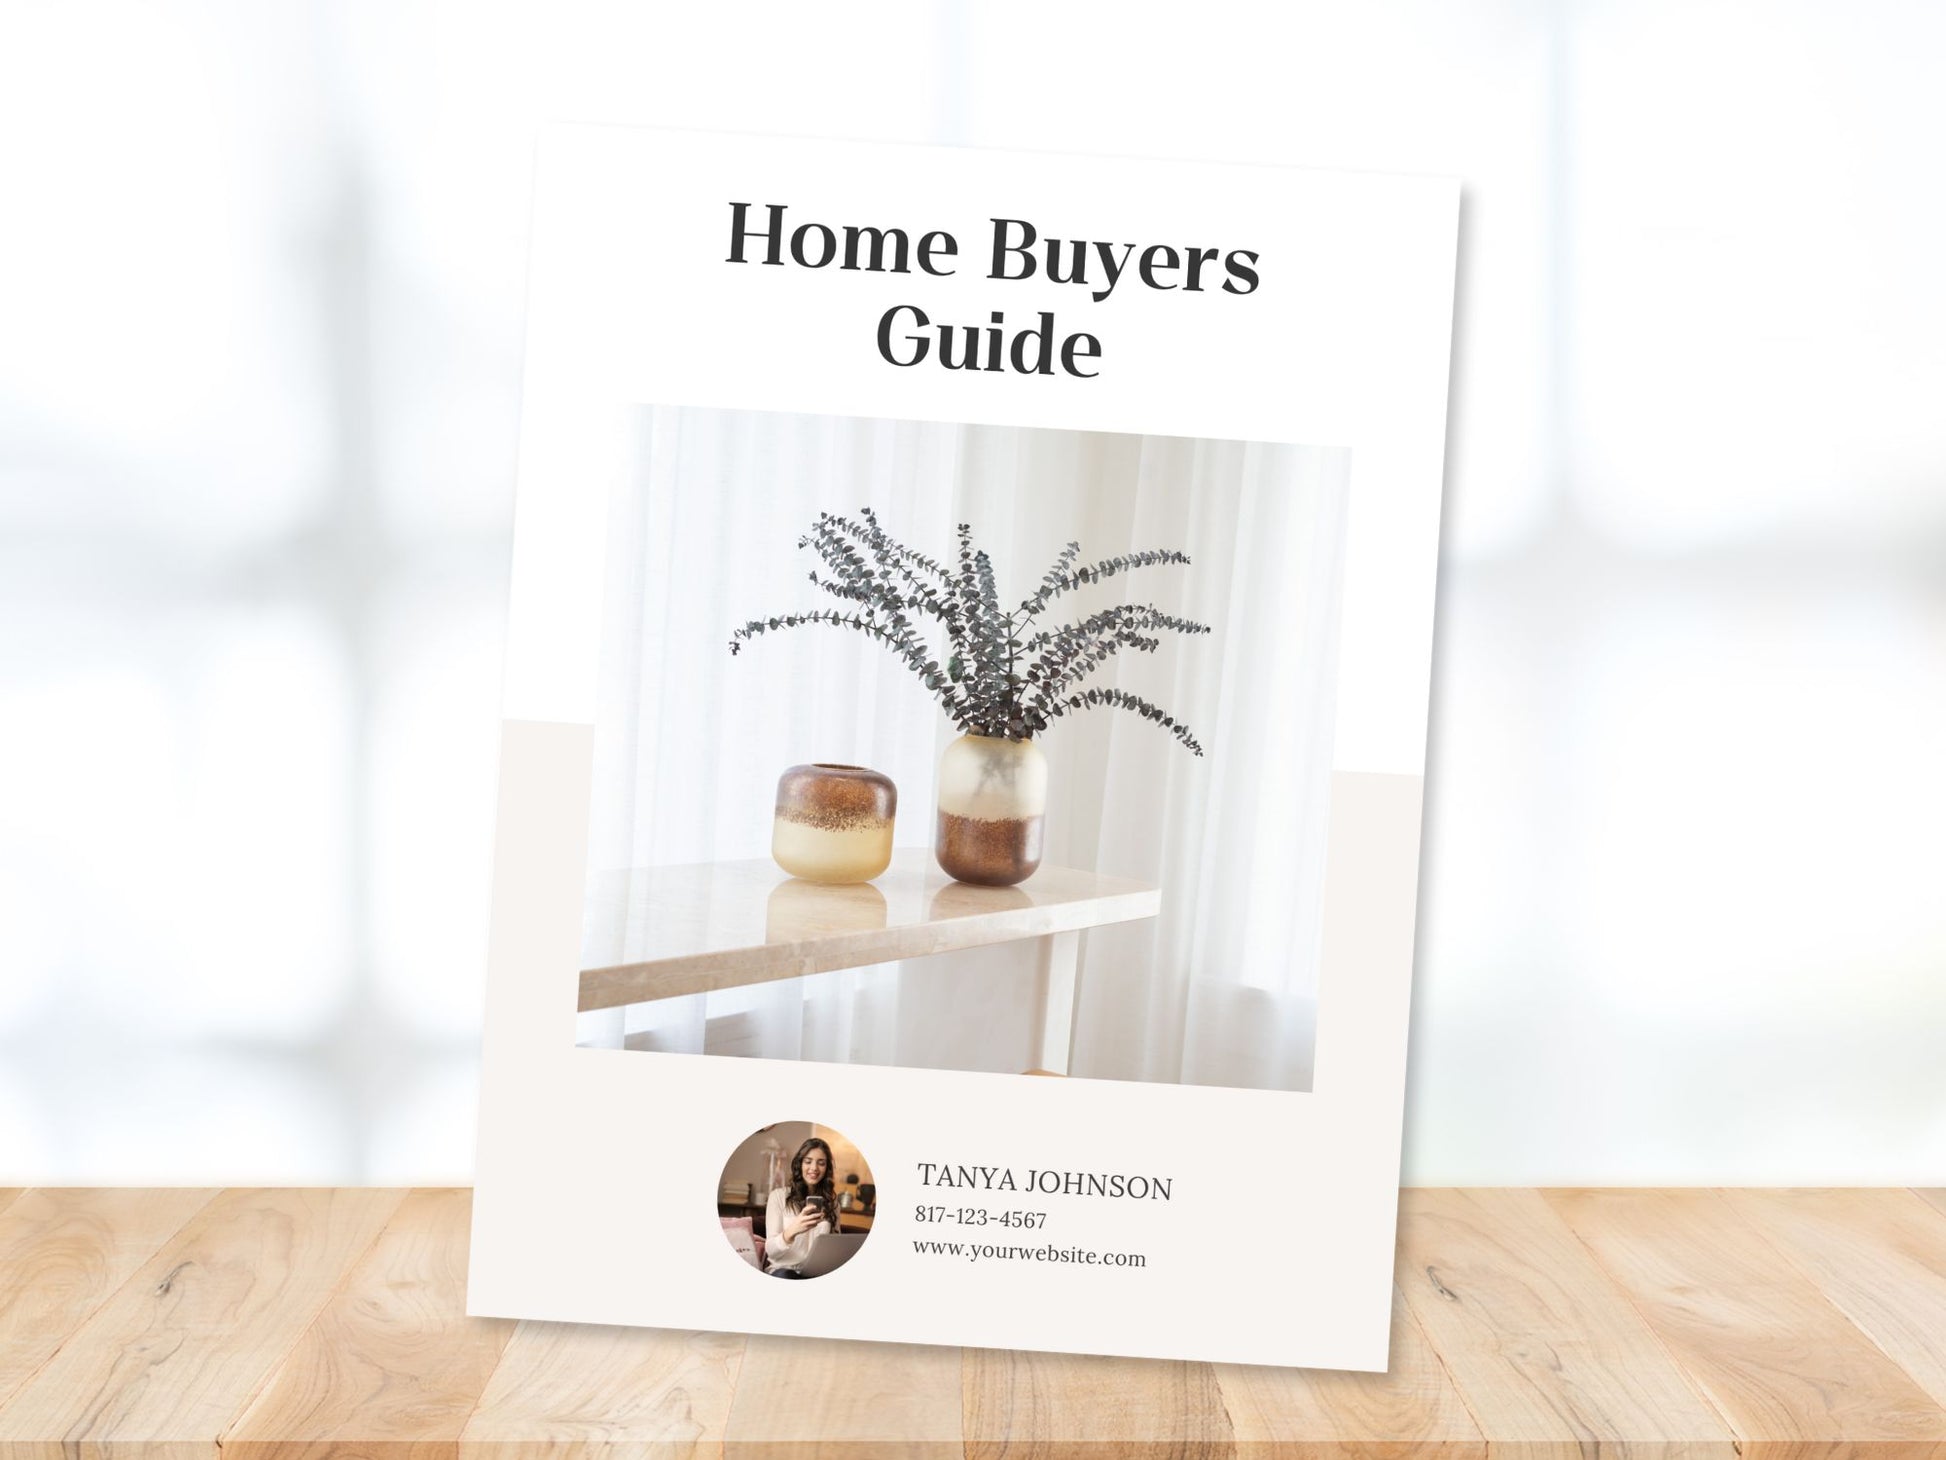 Home Buyer Guide Vol 03 - Empower homebuyers with valuable insights, tips, and checklists. Elevate their home buying experience with this essential resource, guiding them through the real estate journey.